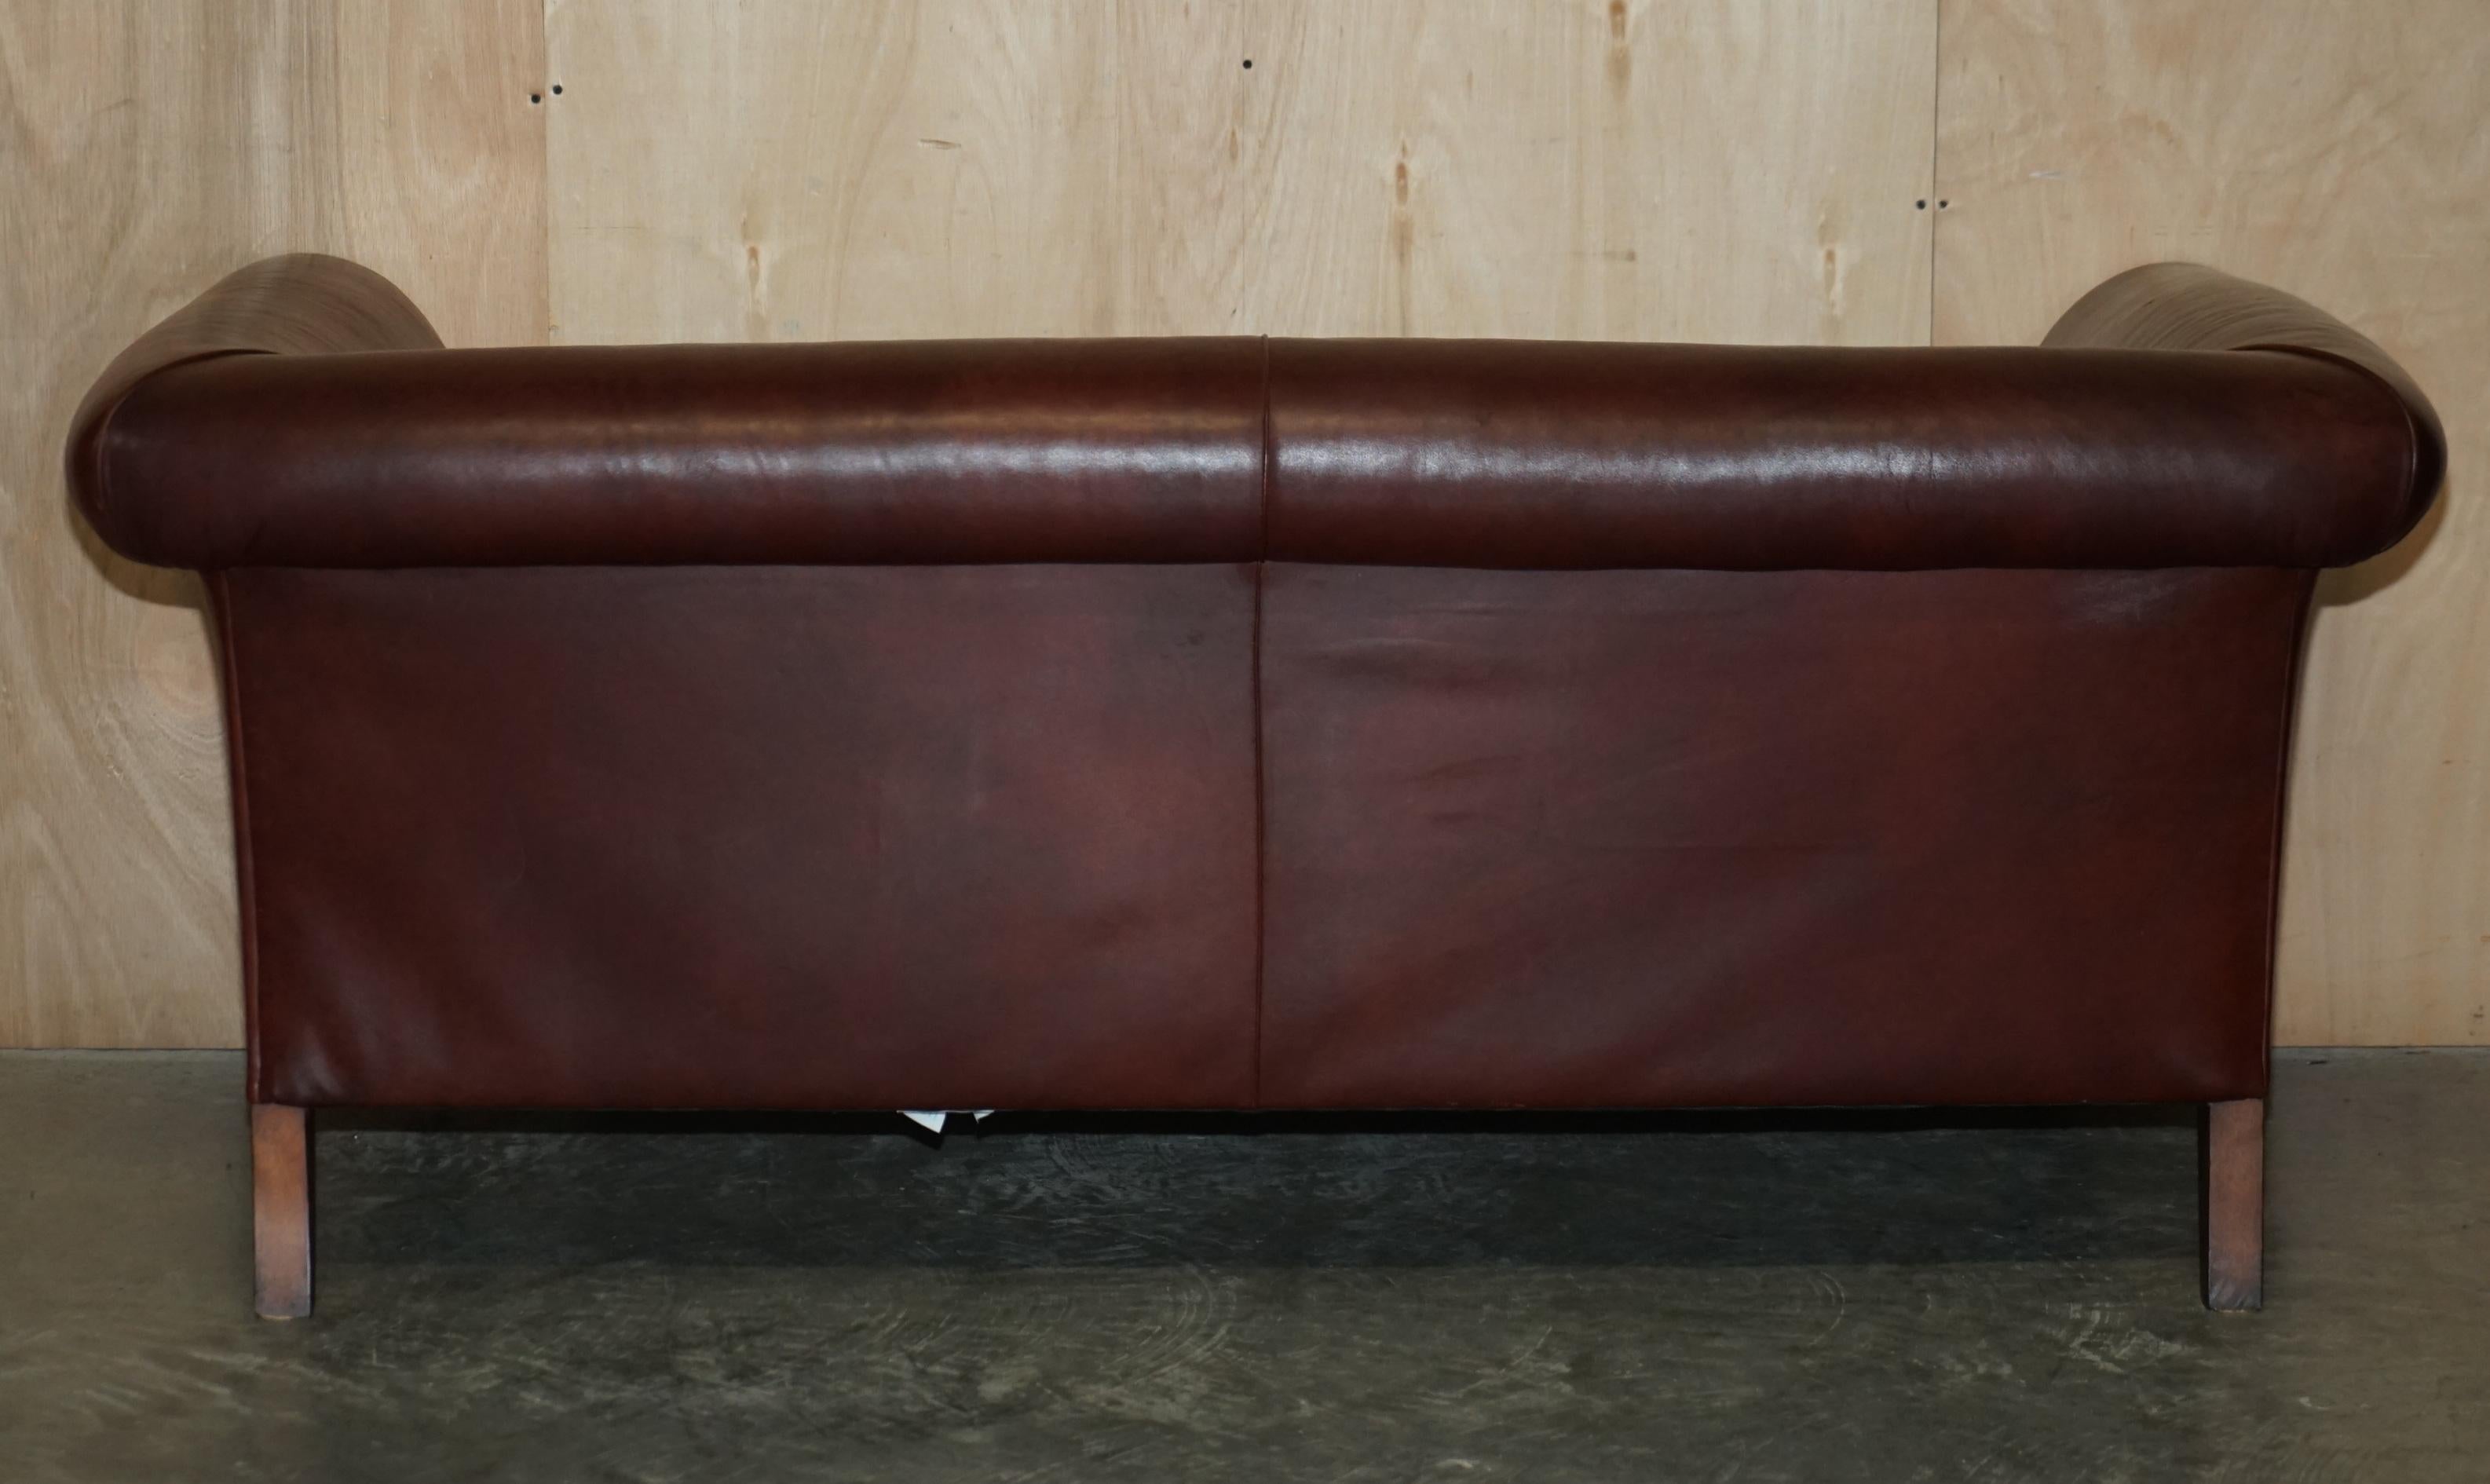 ViNTAGE HAND DYED BROWN LEATHER ART DECO THREE SEAT SOFA FEATHER FILLED SEAT For Sale 10